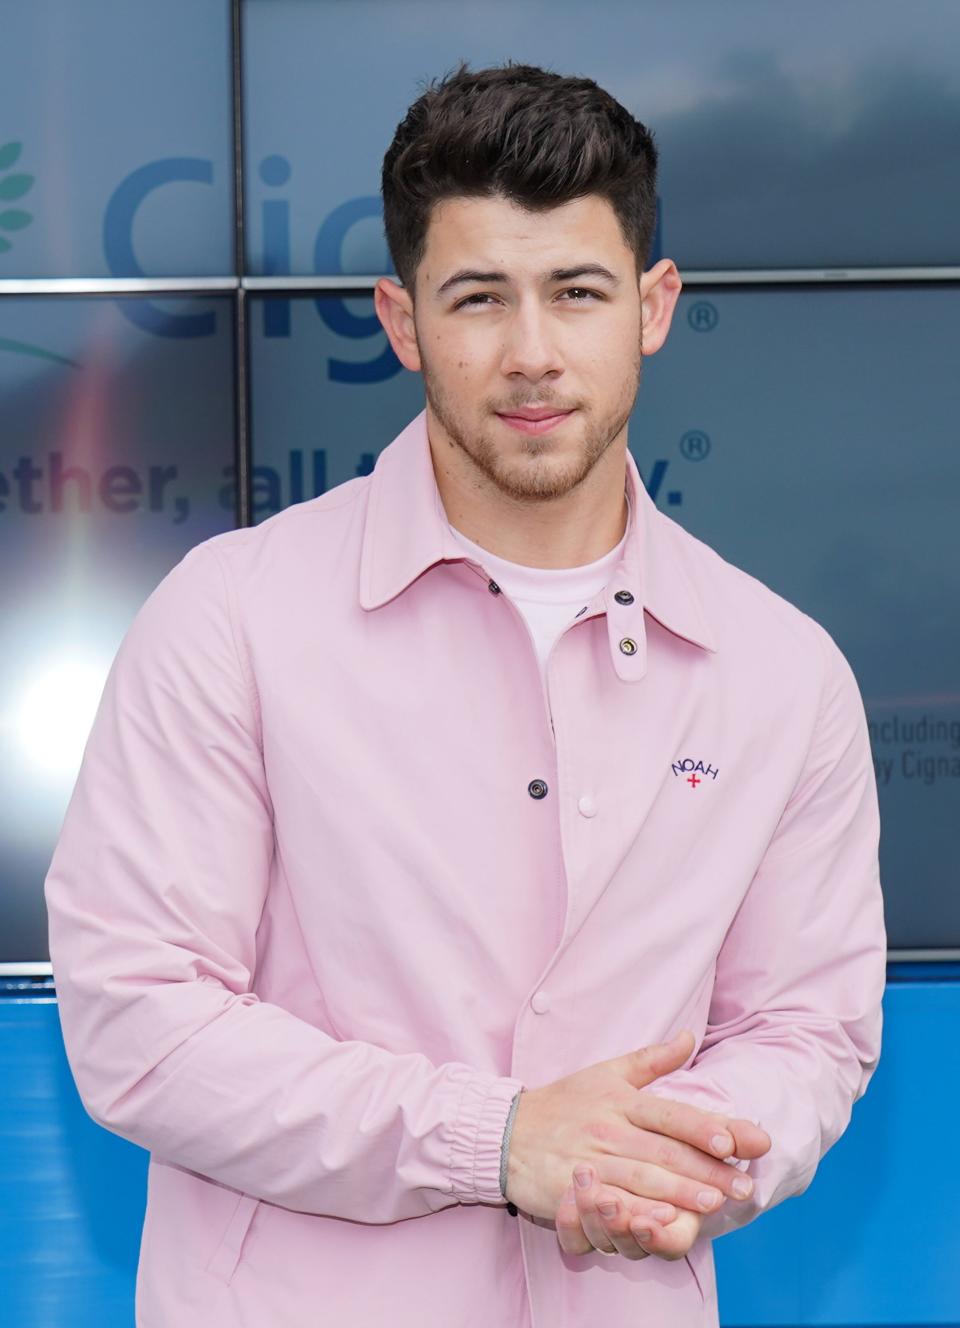 Nick Jonas appears at Cigna's Health Improvement Tour at Evolve on March 07, 2019 in Los Angeles, California.